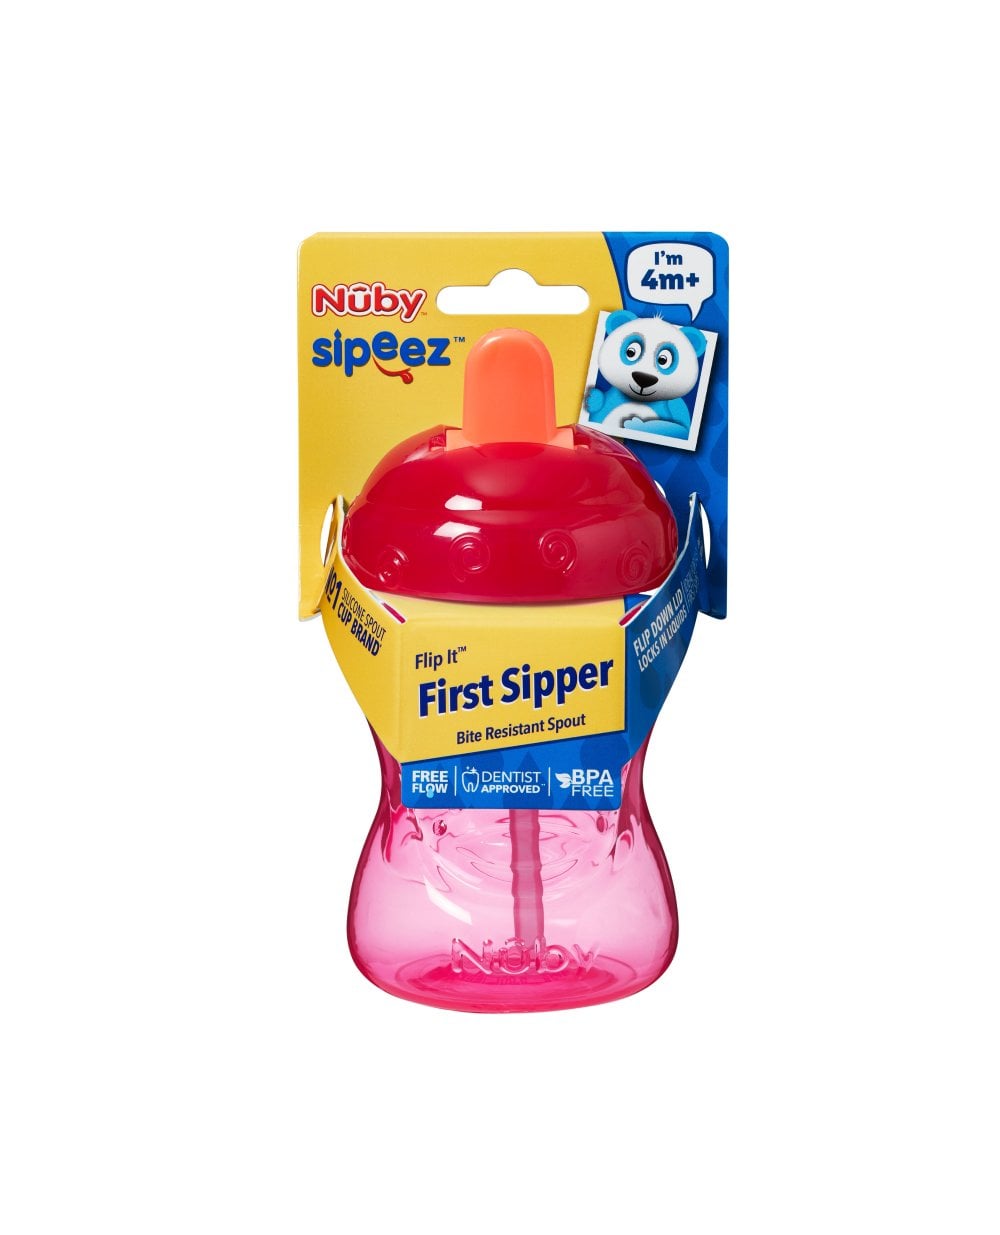 Nuby Sipeez Flip It First Sipper Cup - Pink